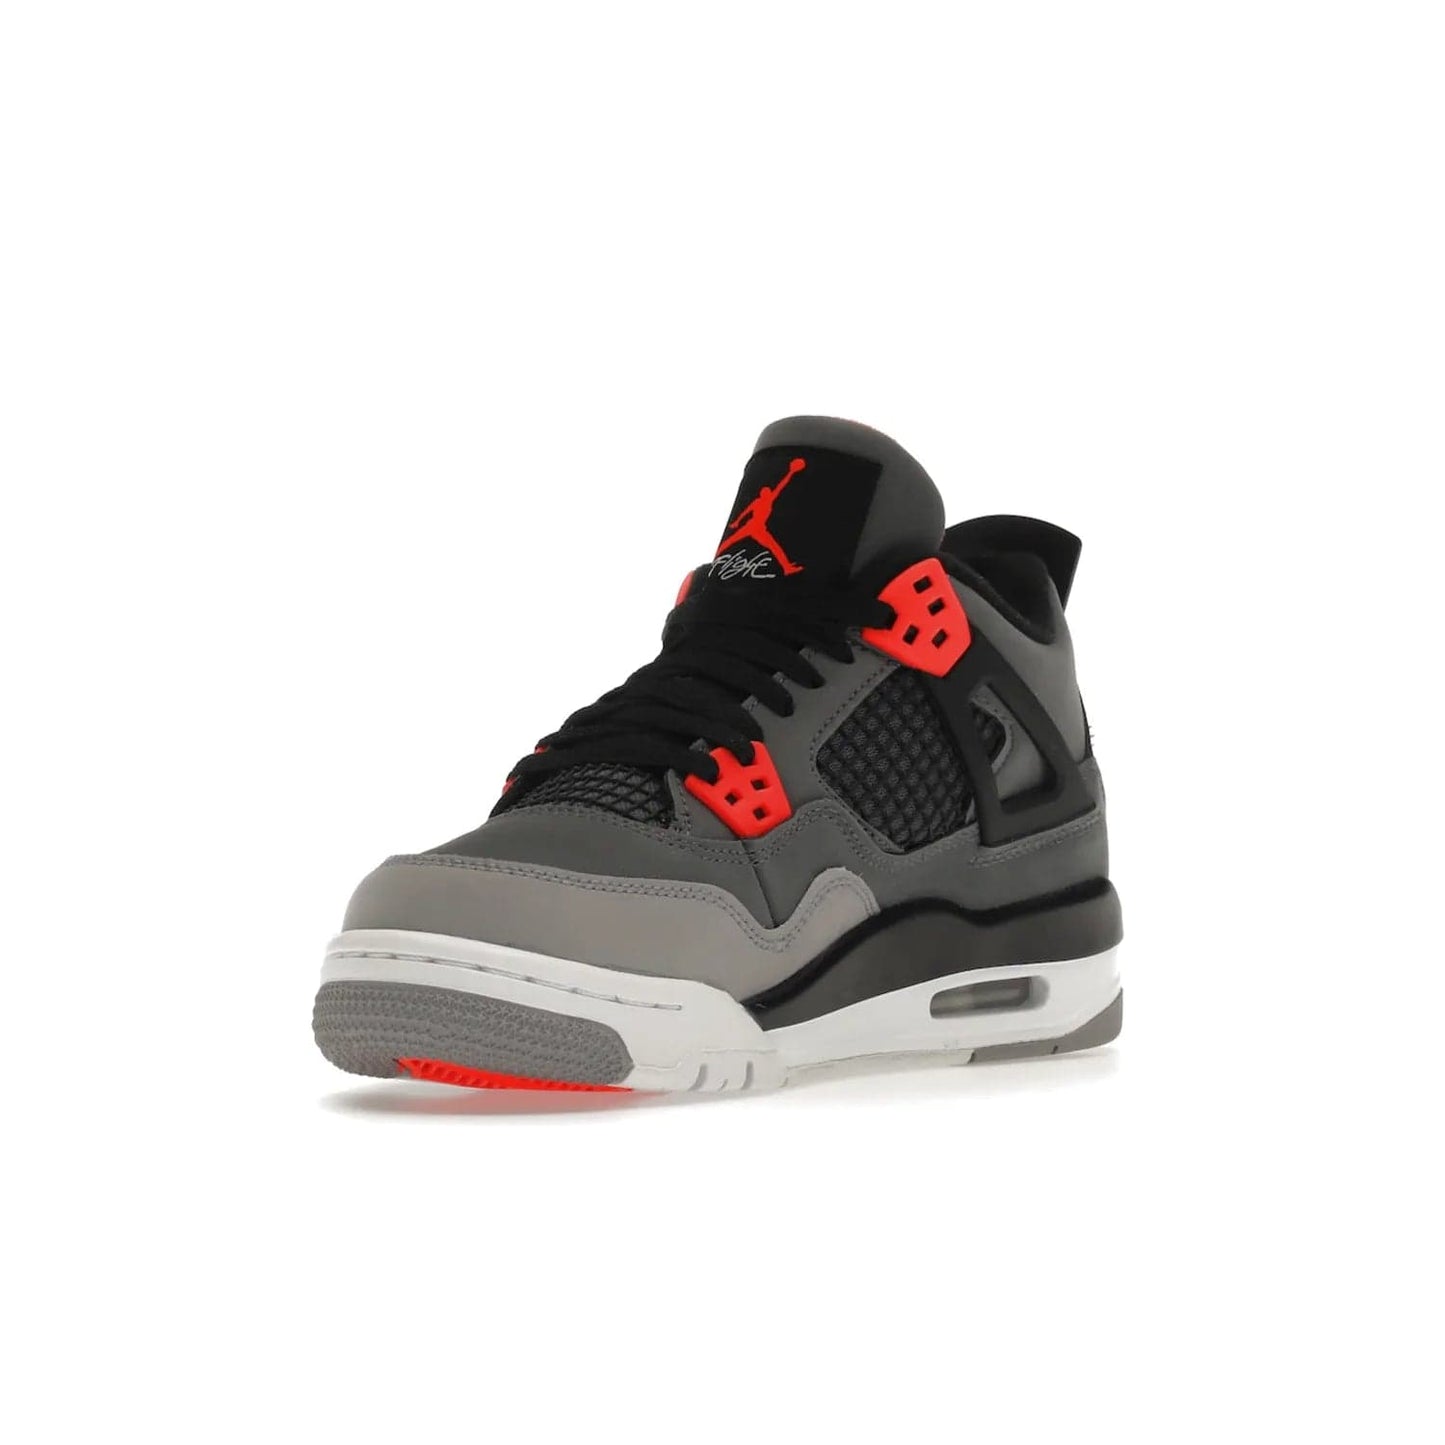 Jordan 4 Retro Infrared (GS) - Image 14 - Only at www.BallersClubKickz.com - Shop the Air Jordan 4 Retro Infrared (GS) for a classic silhouette with subtle yet bold features. Dark grey nubuck upper with lighter forefoot overlay, black accents, Infrared molded eyelets & woven tongue tag. Available June 2022.